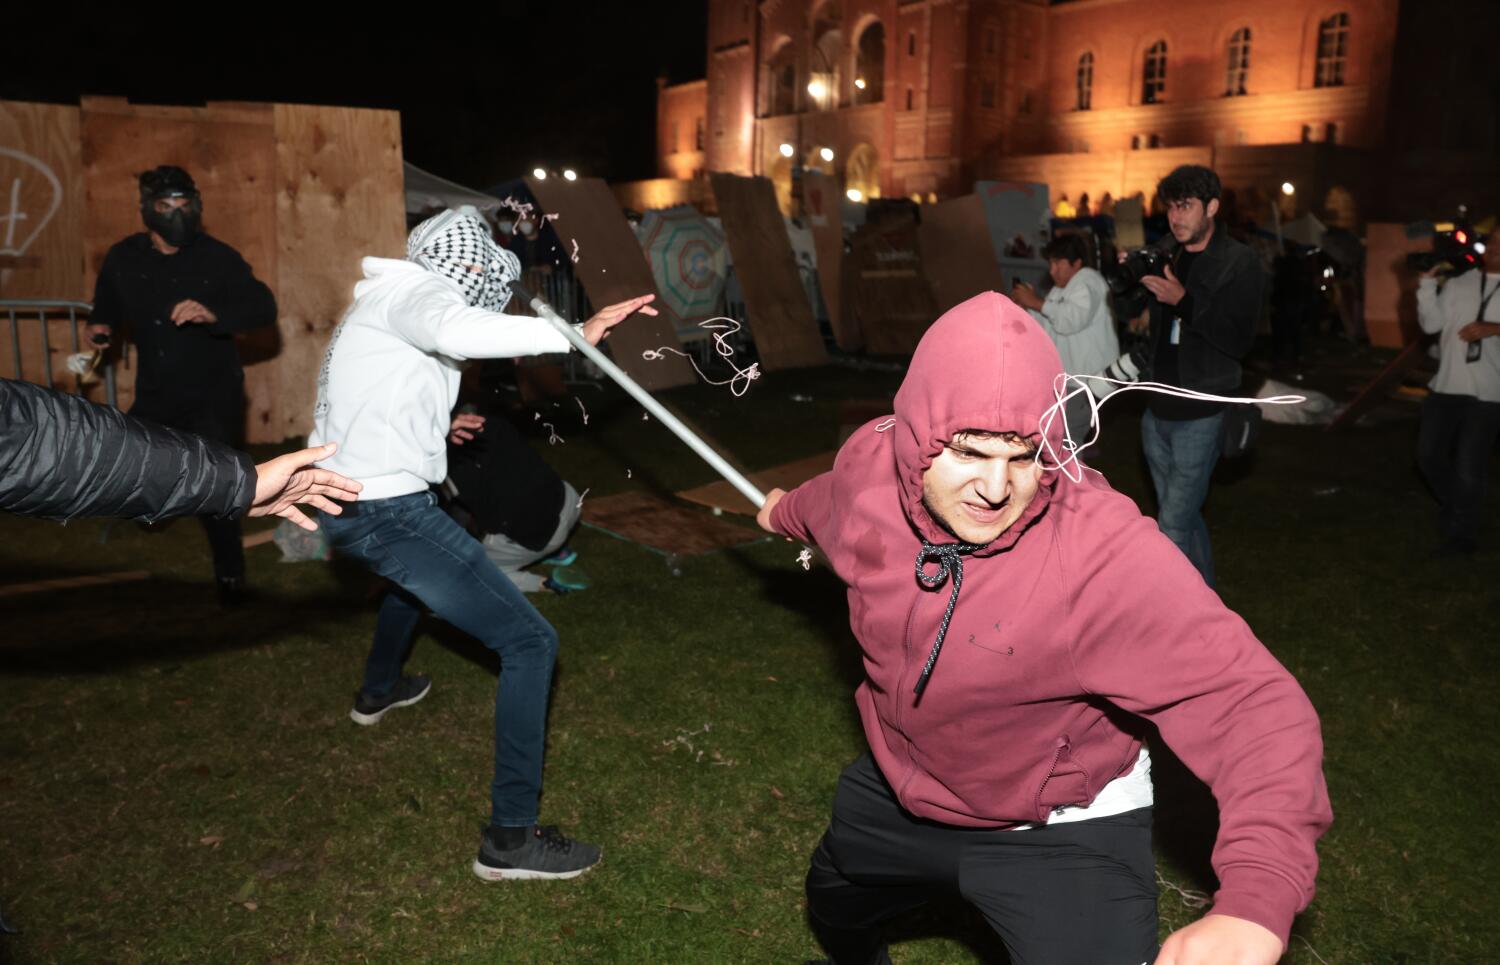 To find masked mob members who attacked UCLA camp, police are using Jan. 6 tactics